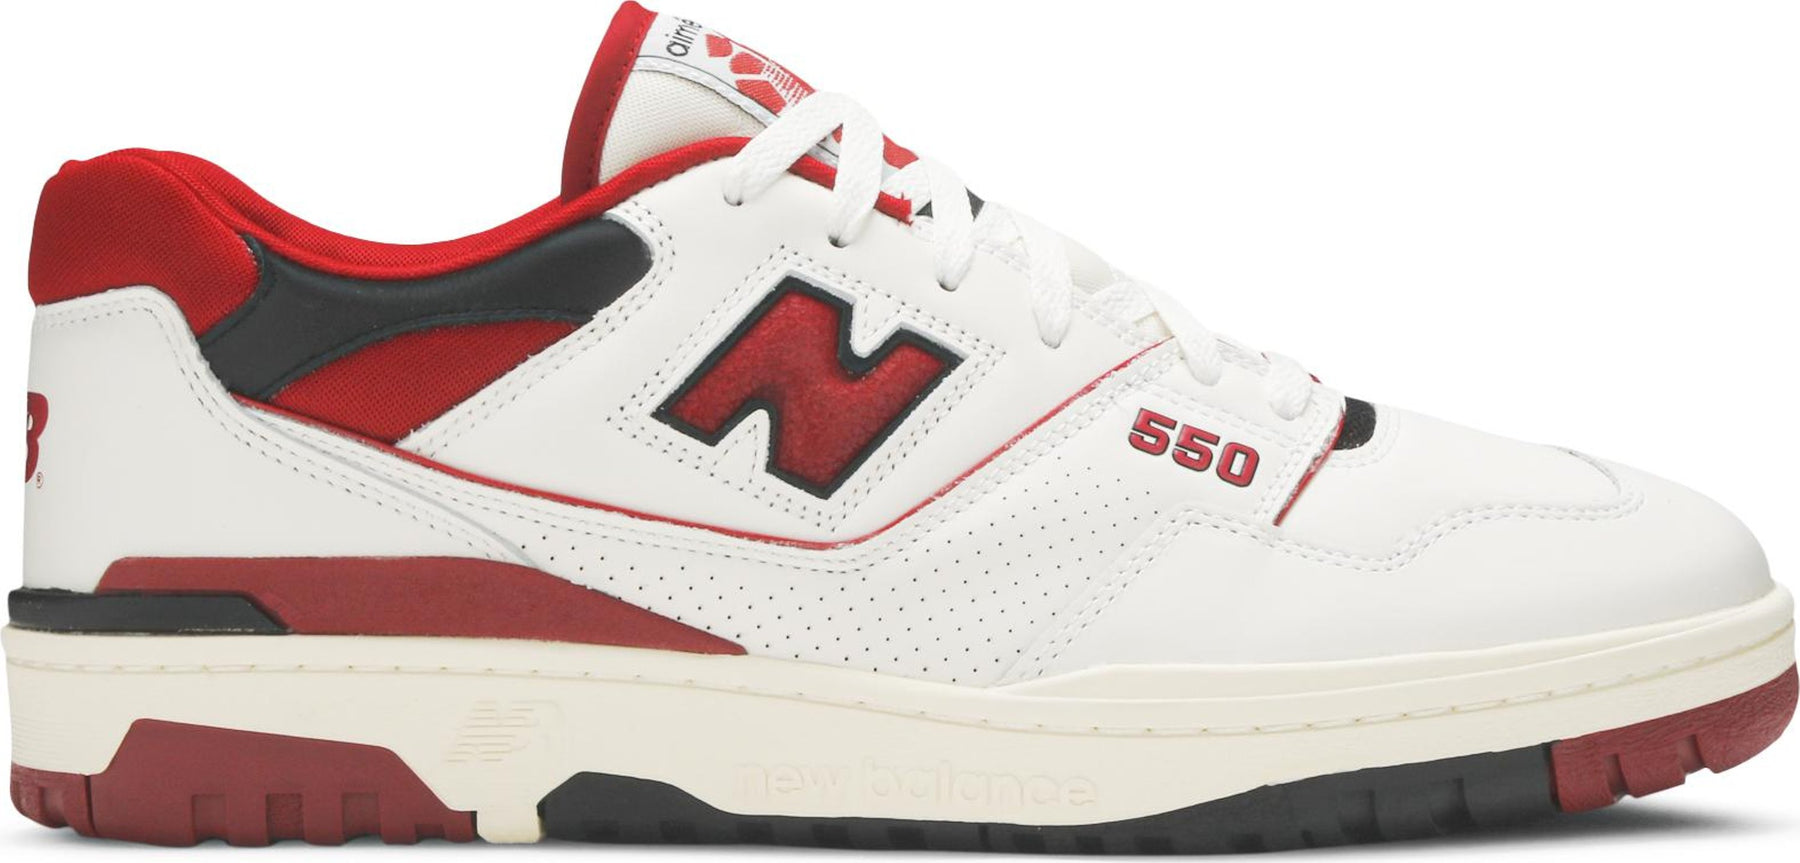 New Balance 550 Aime Leon Dore White Red (PreOwned)